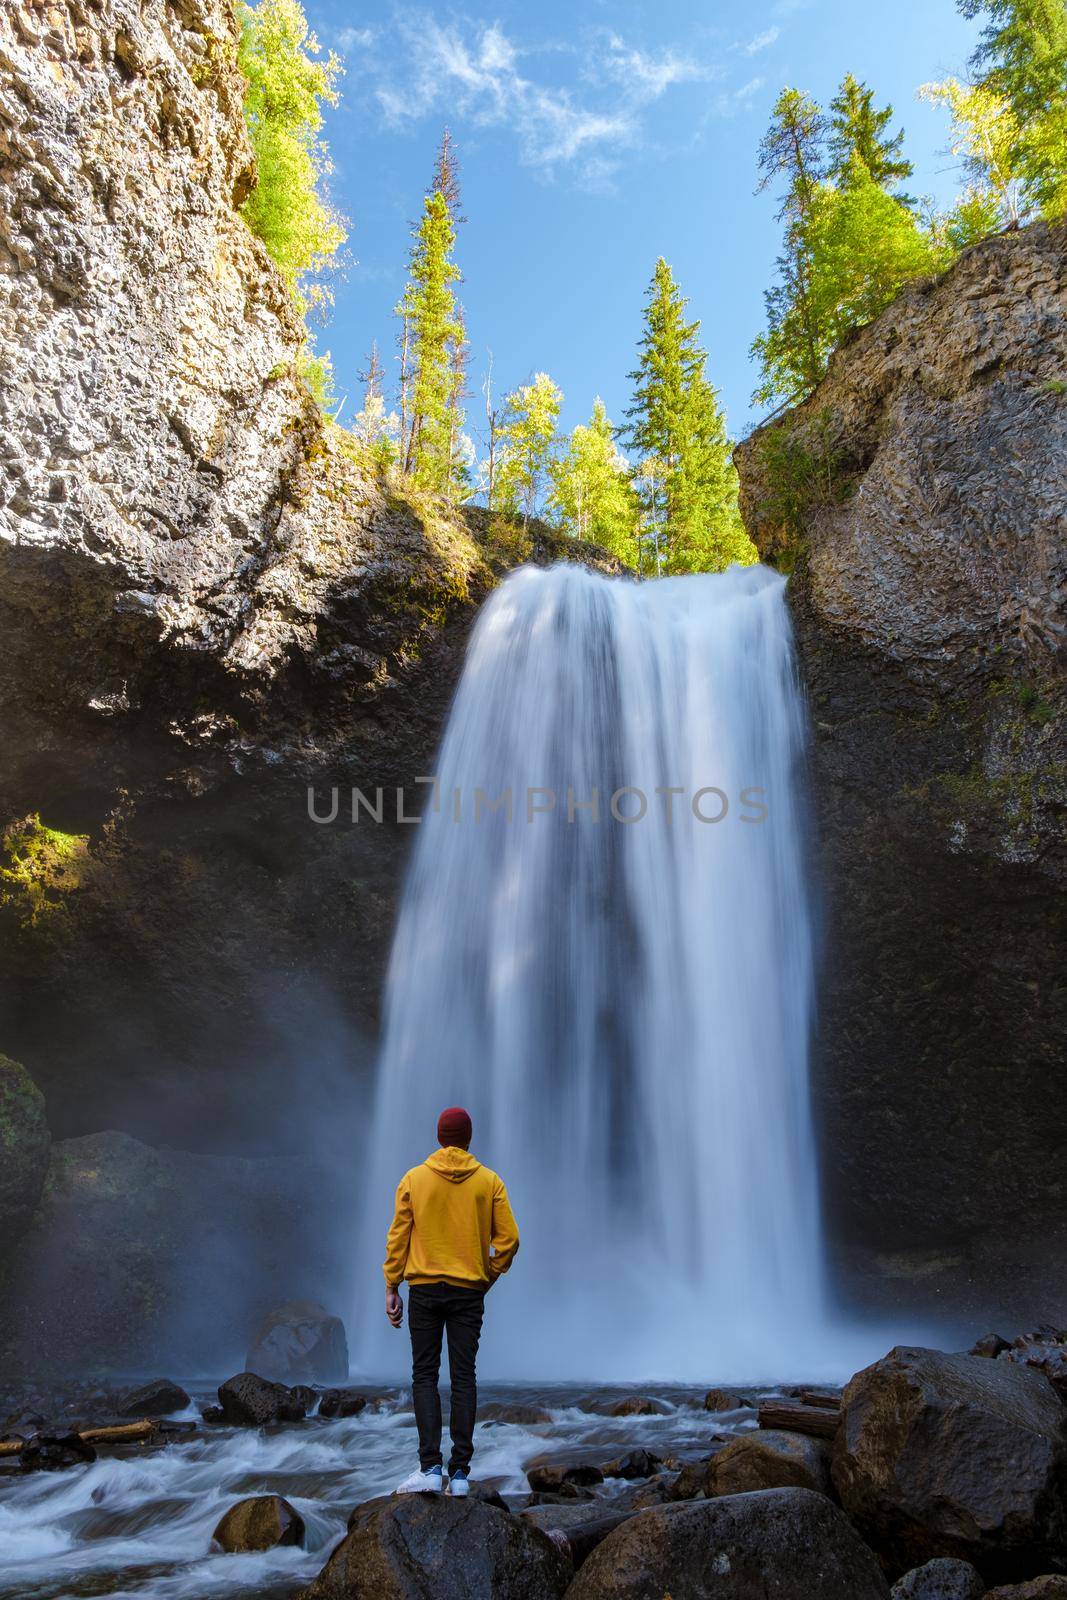 Beautiful waterfall in Canada, couple visit Helmcken Falls, the most famous waterfall in Wells Gray Provincial Park in British Columbia, Canada. young men standing looking at a waterfall